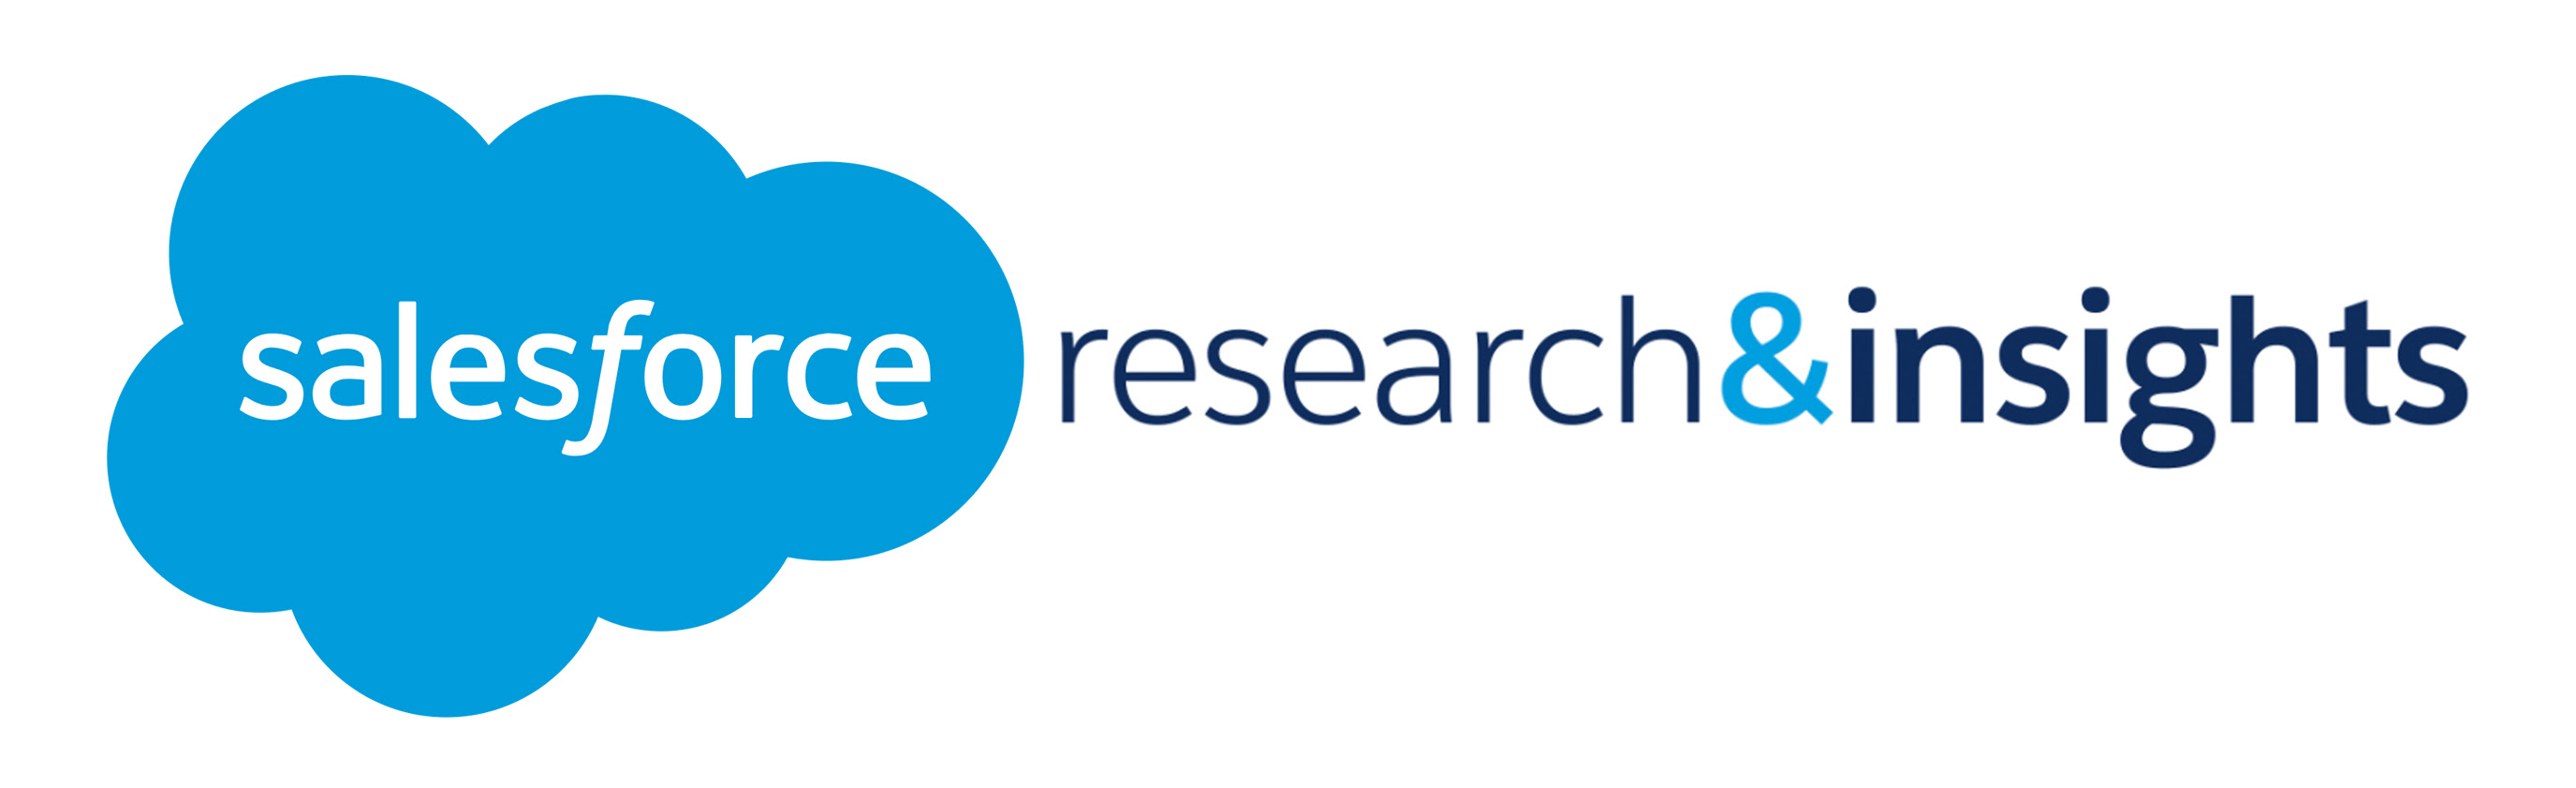 Salesforce Research & Insights